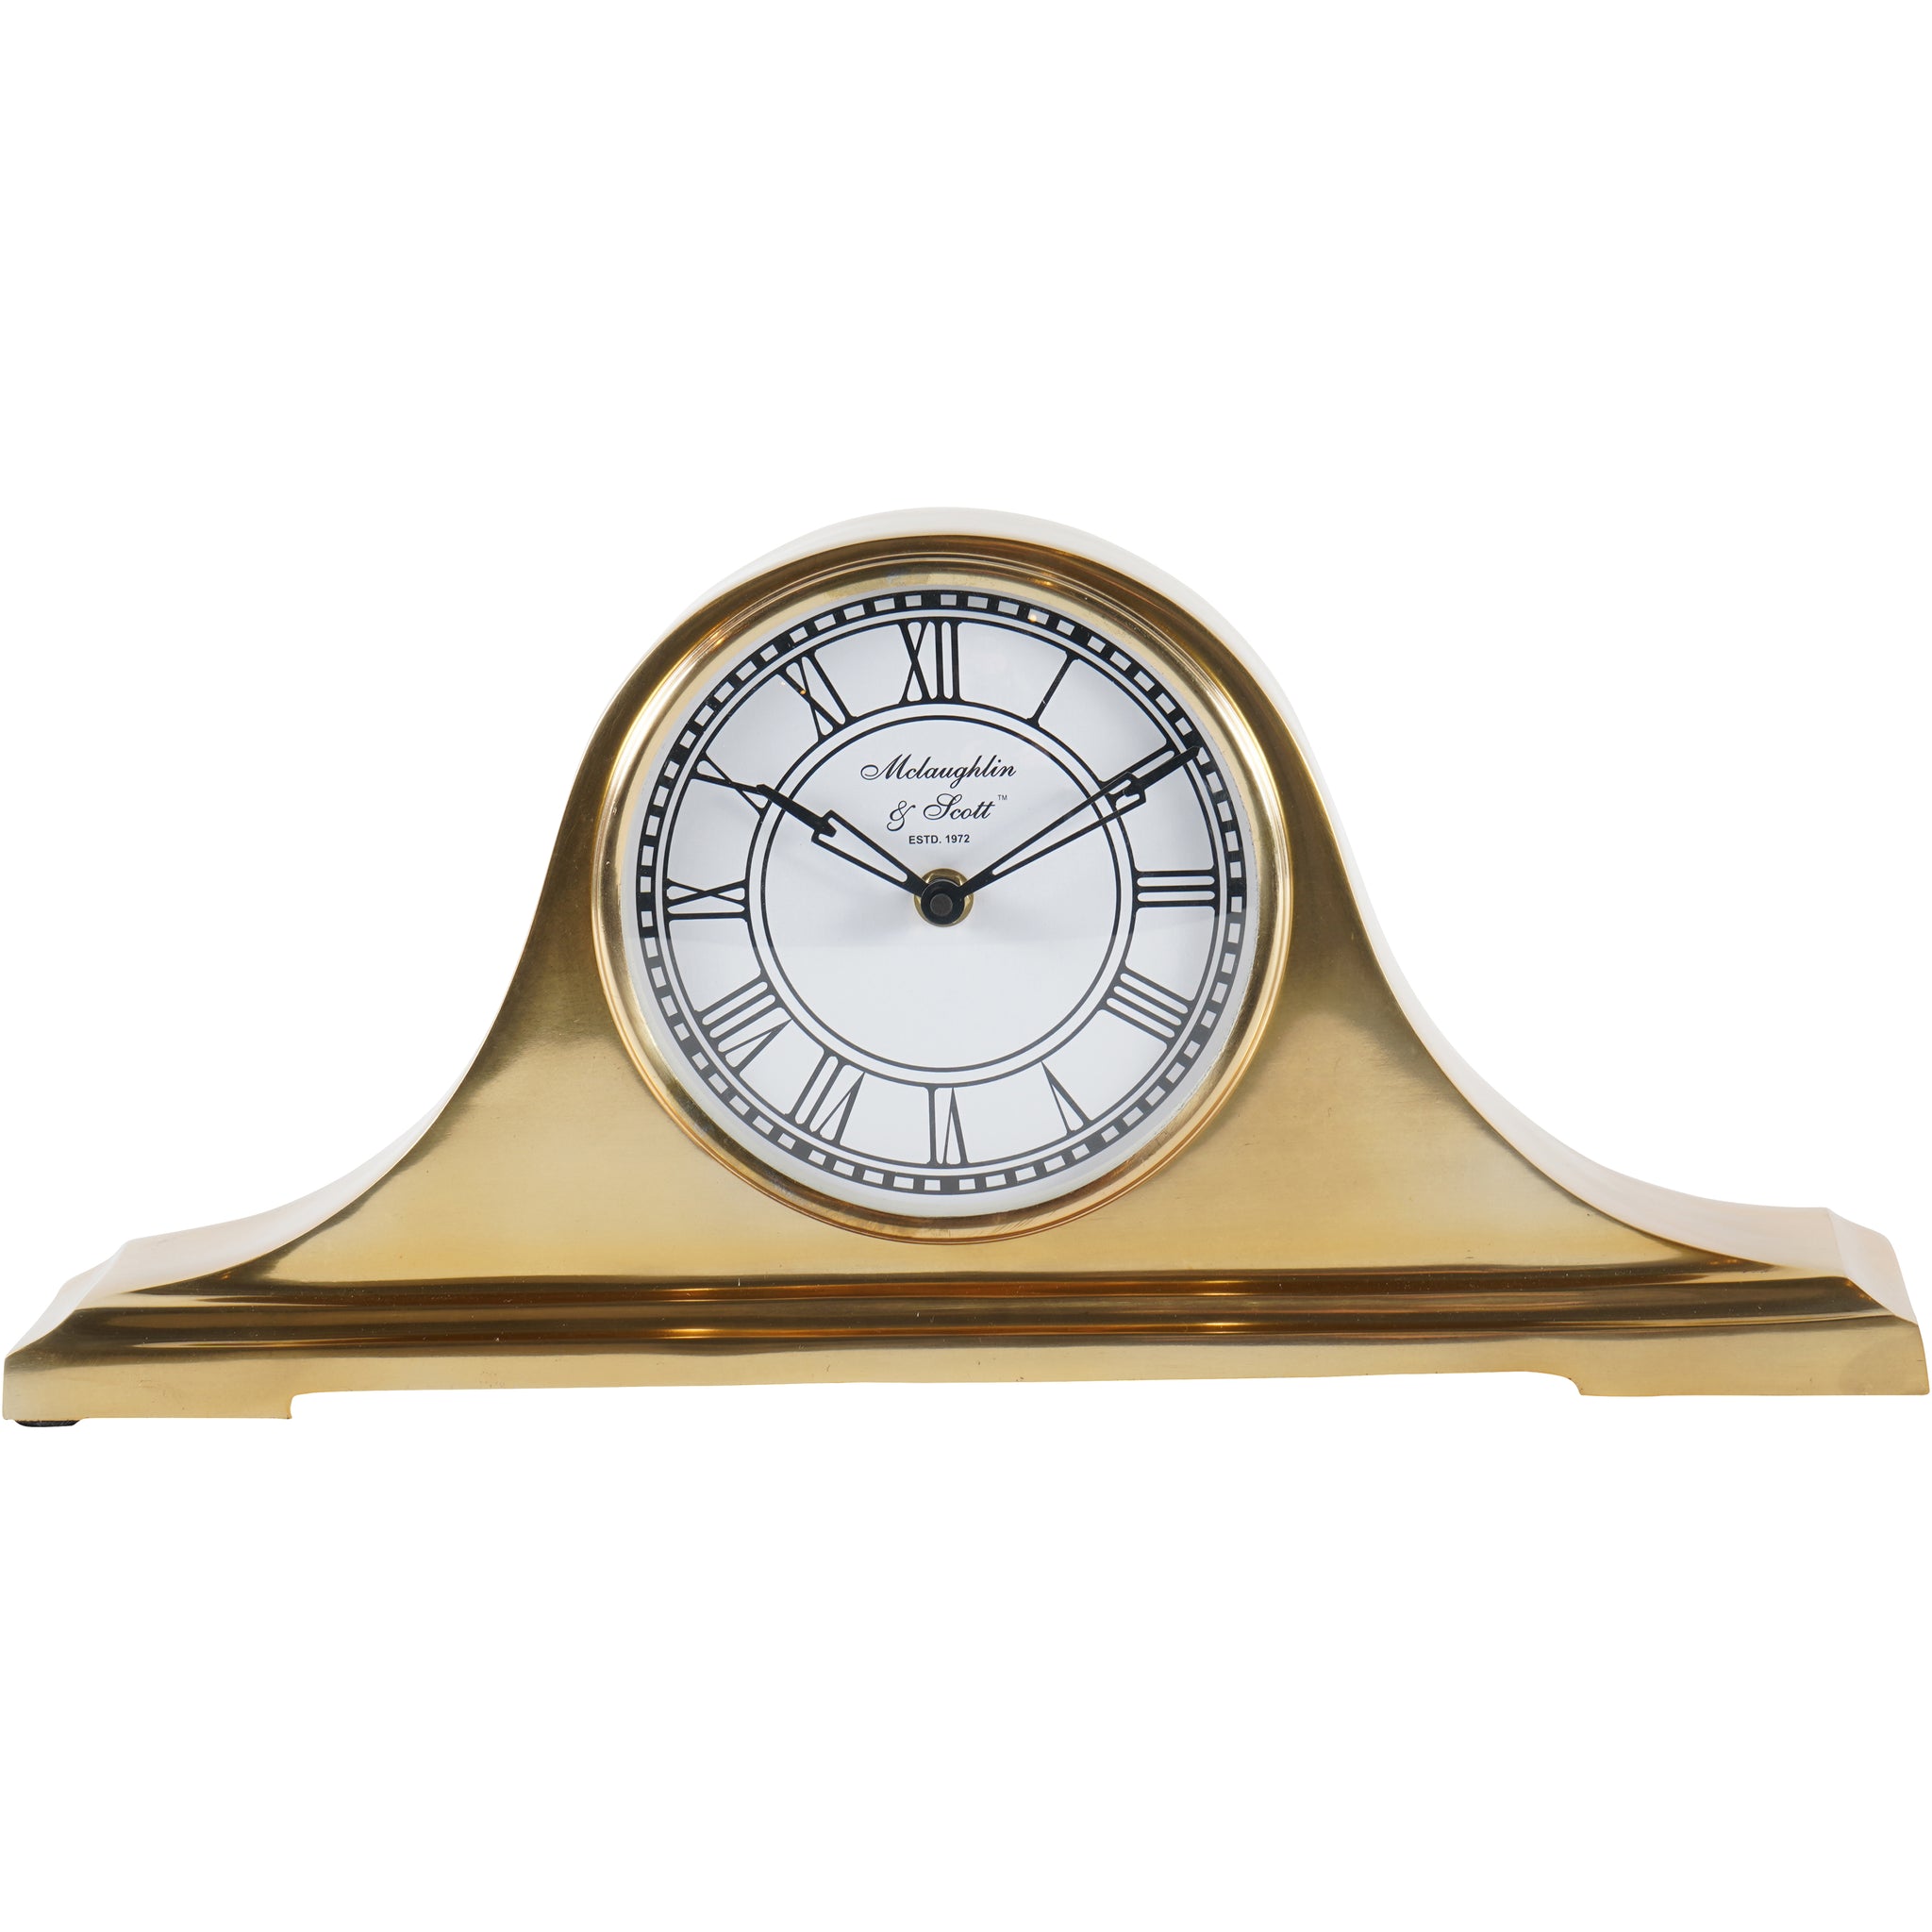 Period Style Carriage Mantel Clock in Brass Finish